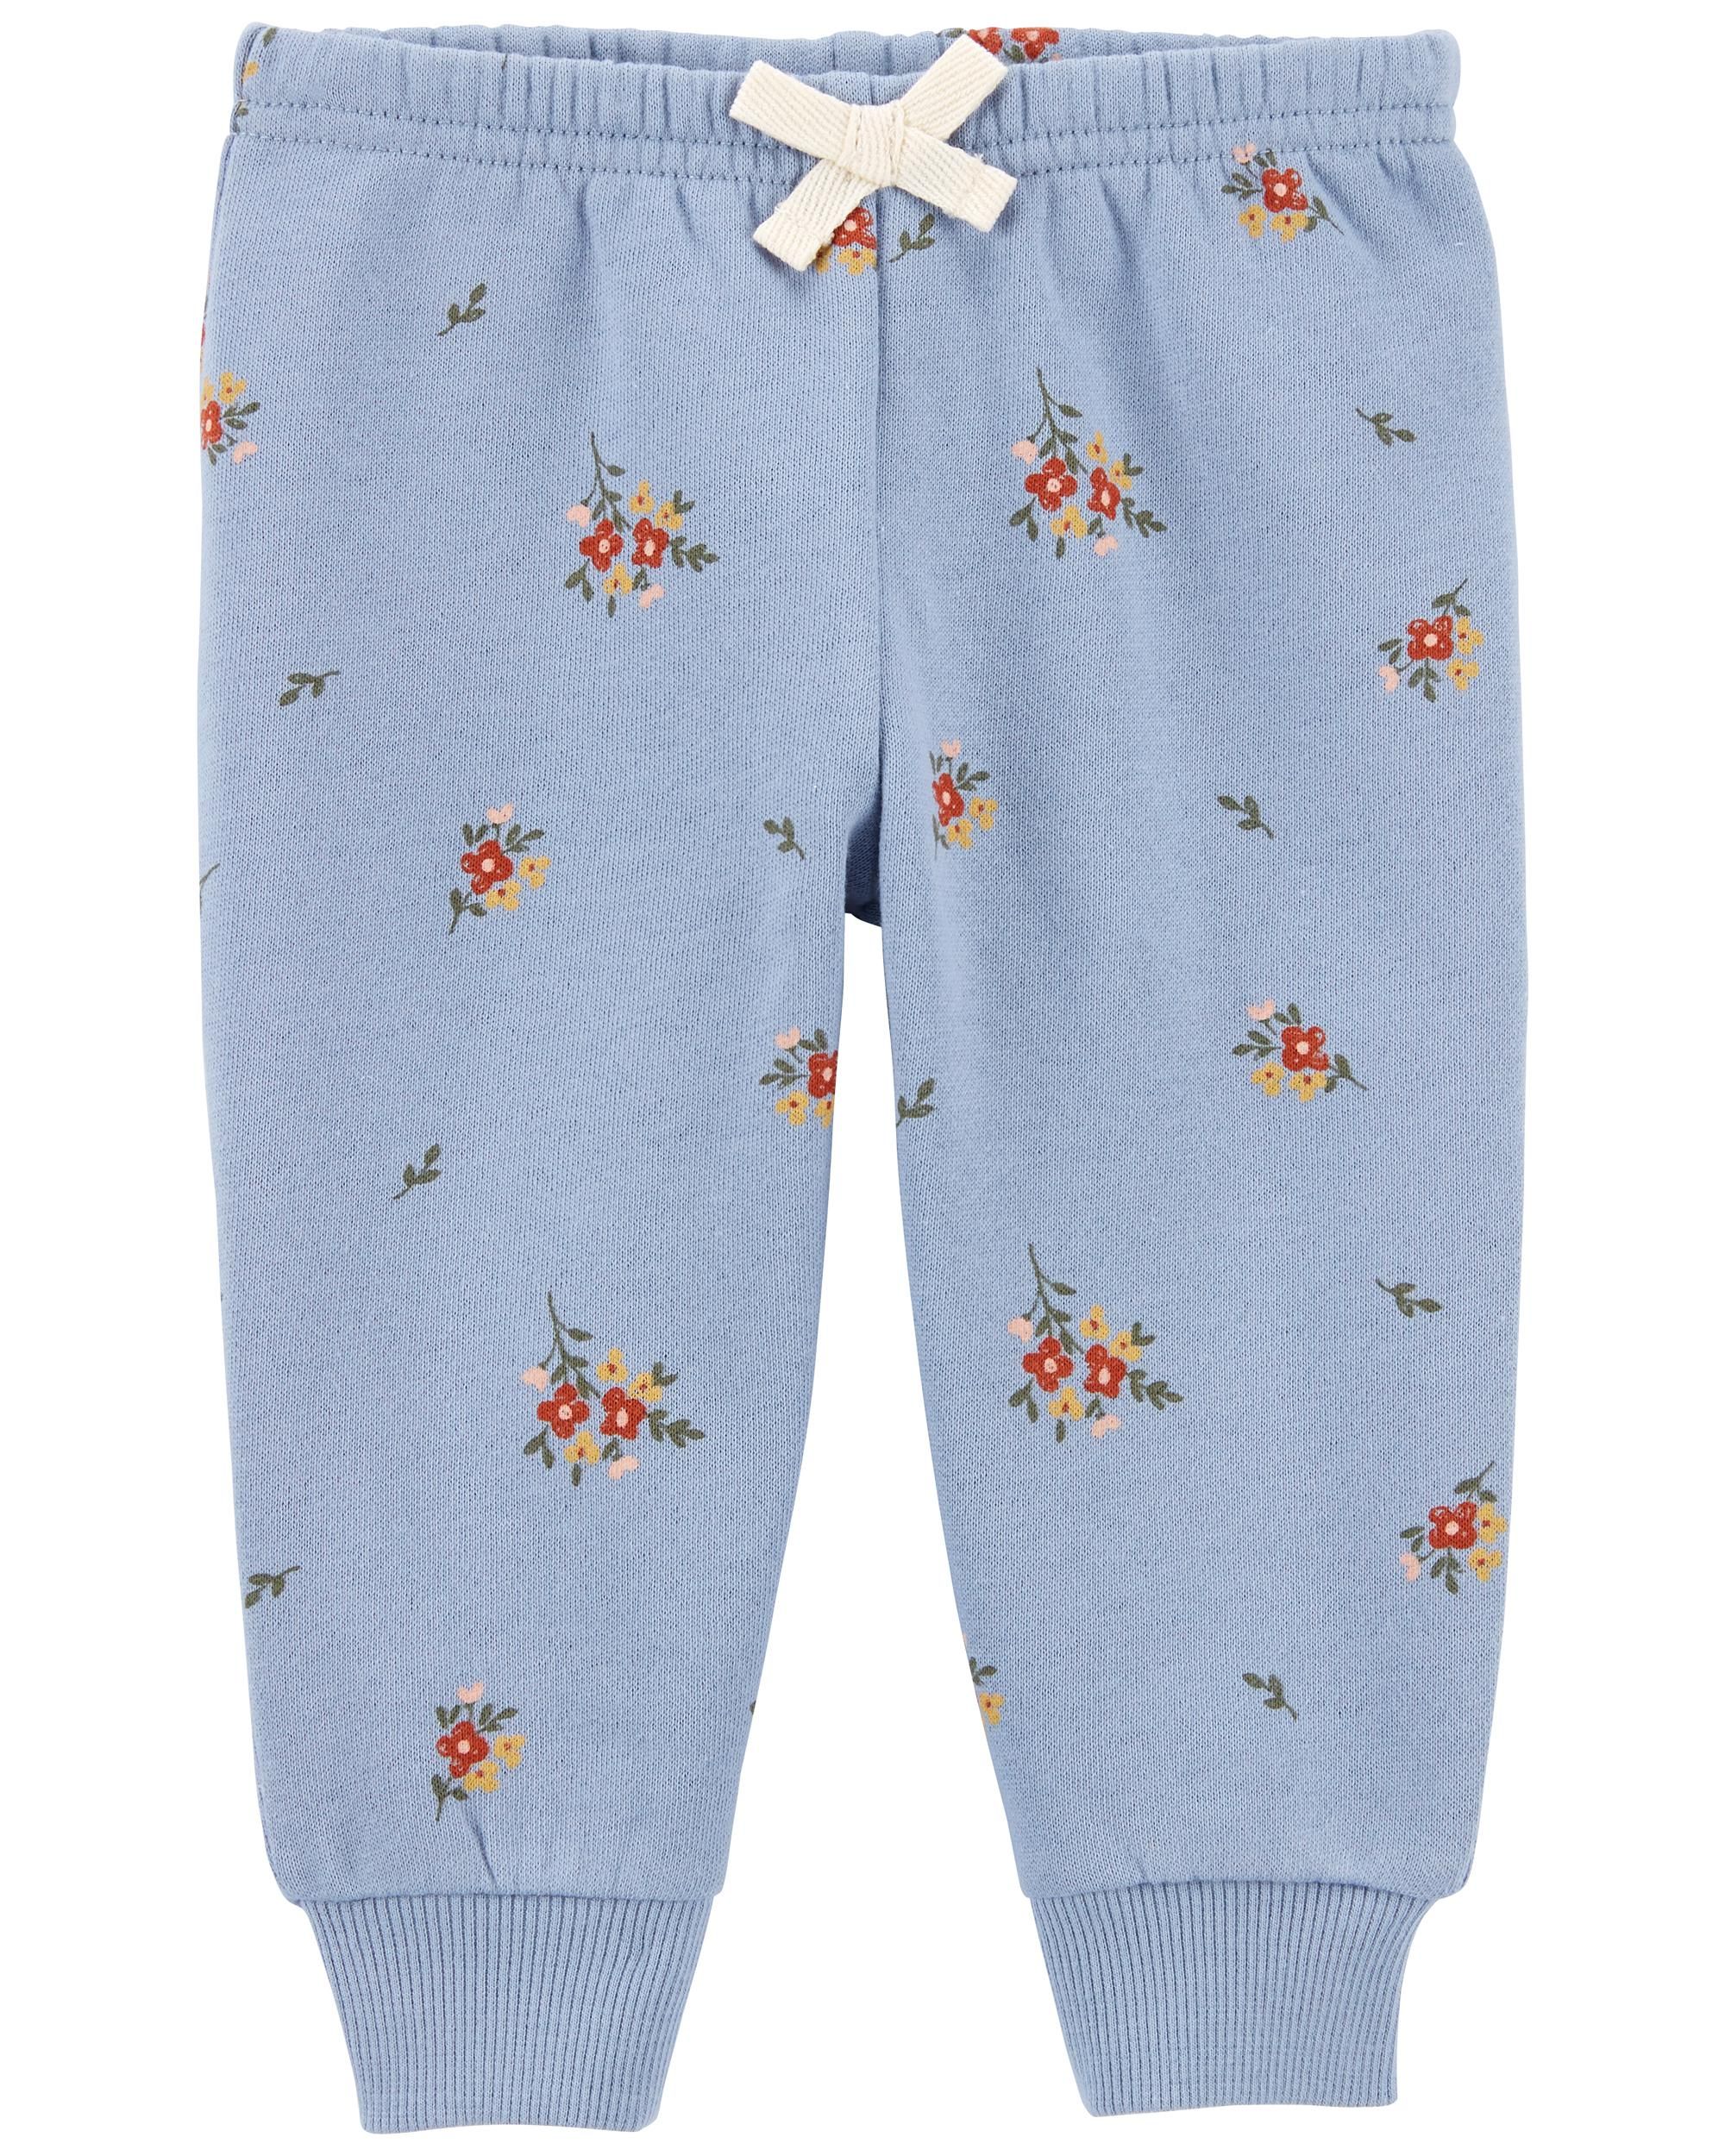 Baby Pull-On Pants | Carter's